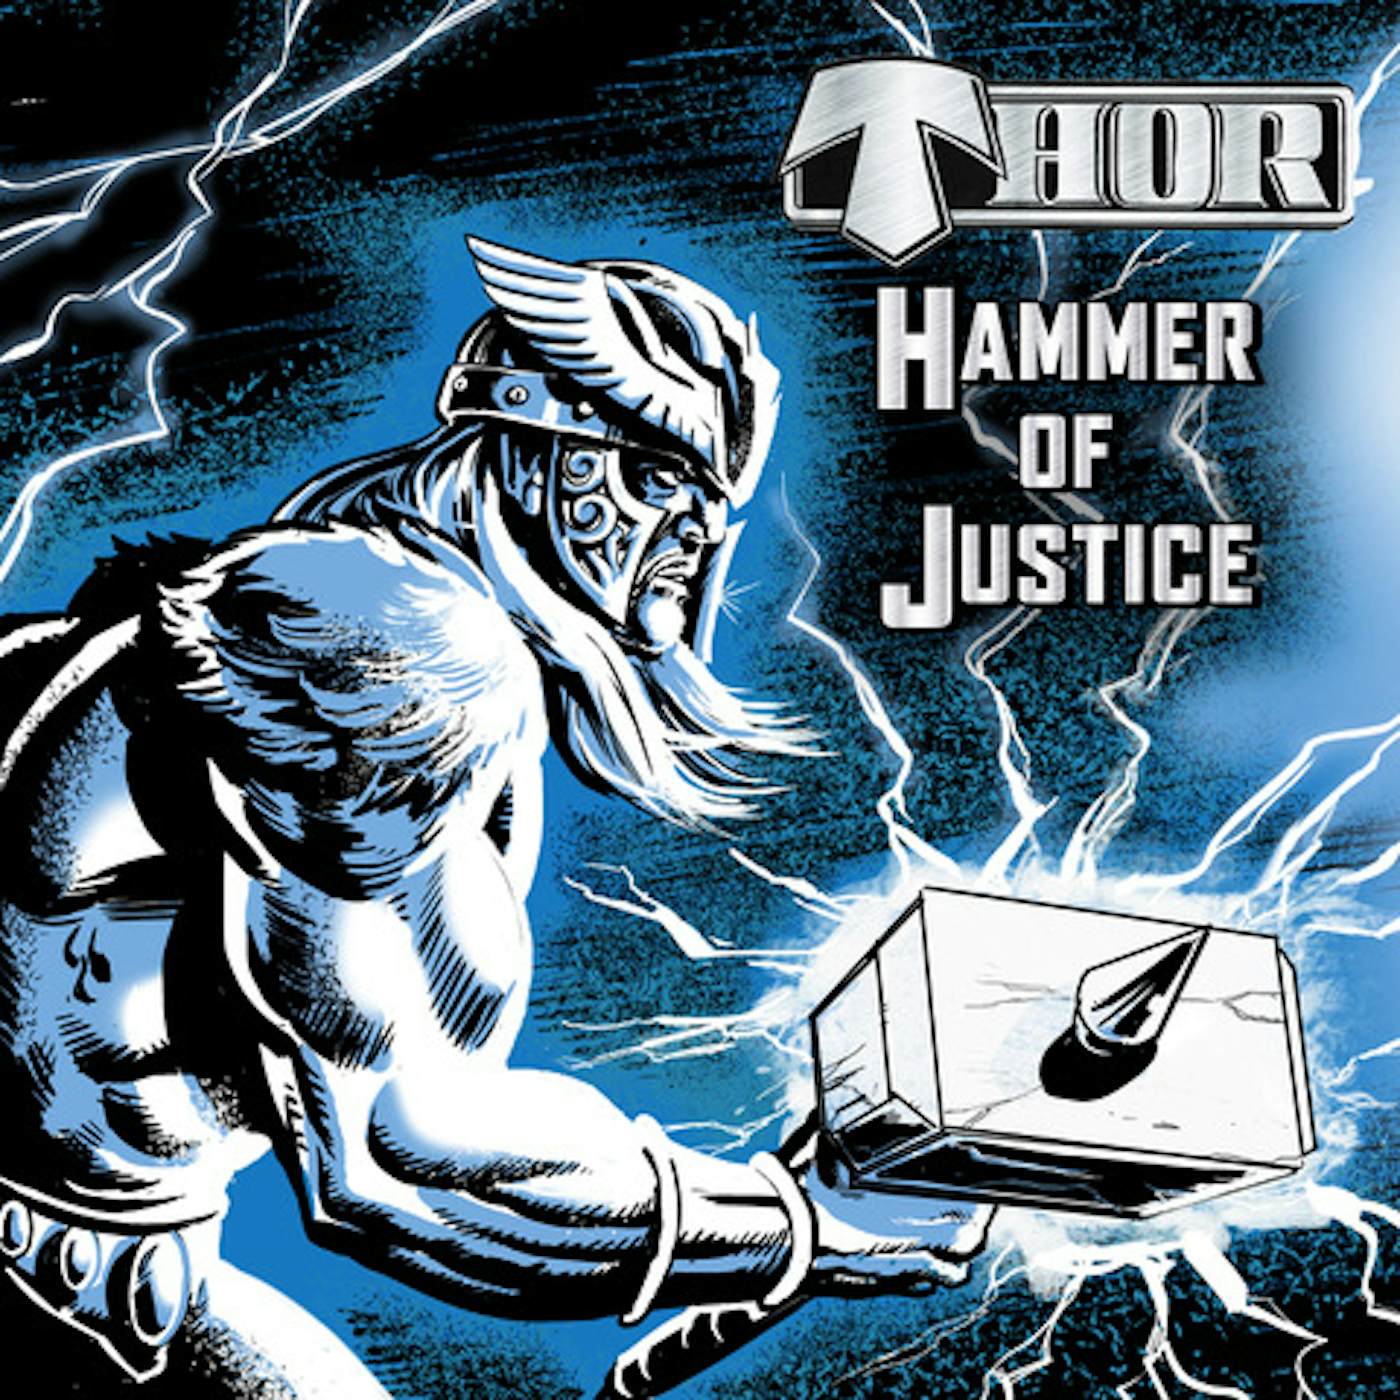 Thor Hammer of Justice Vinyl Record